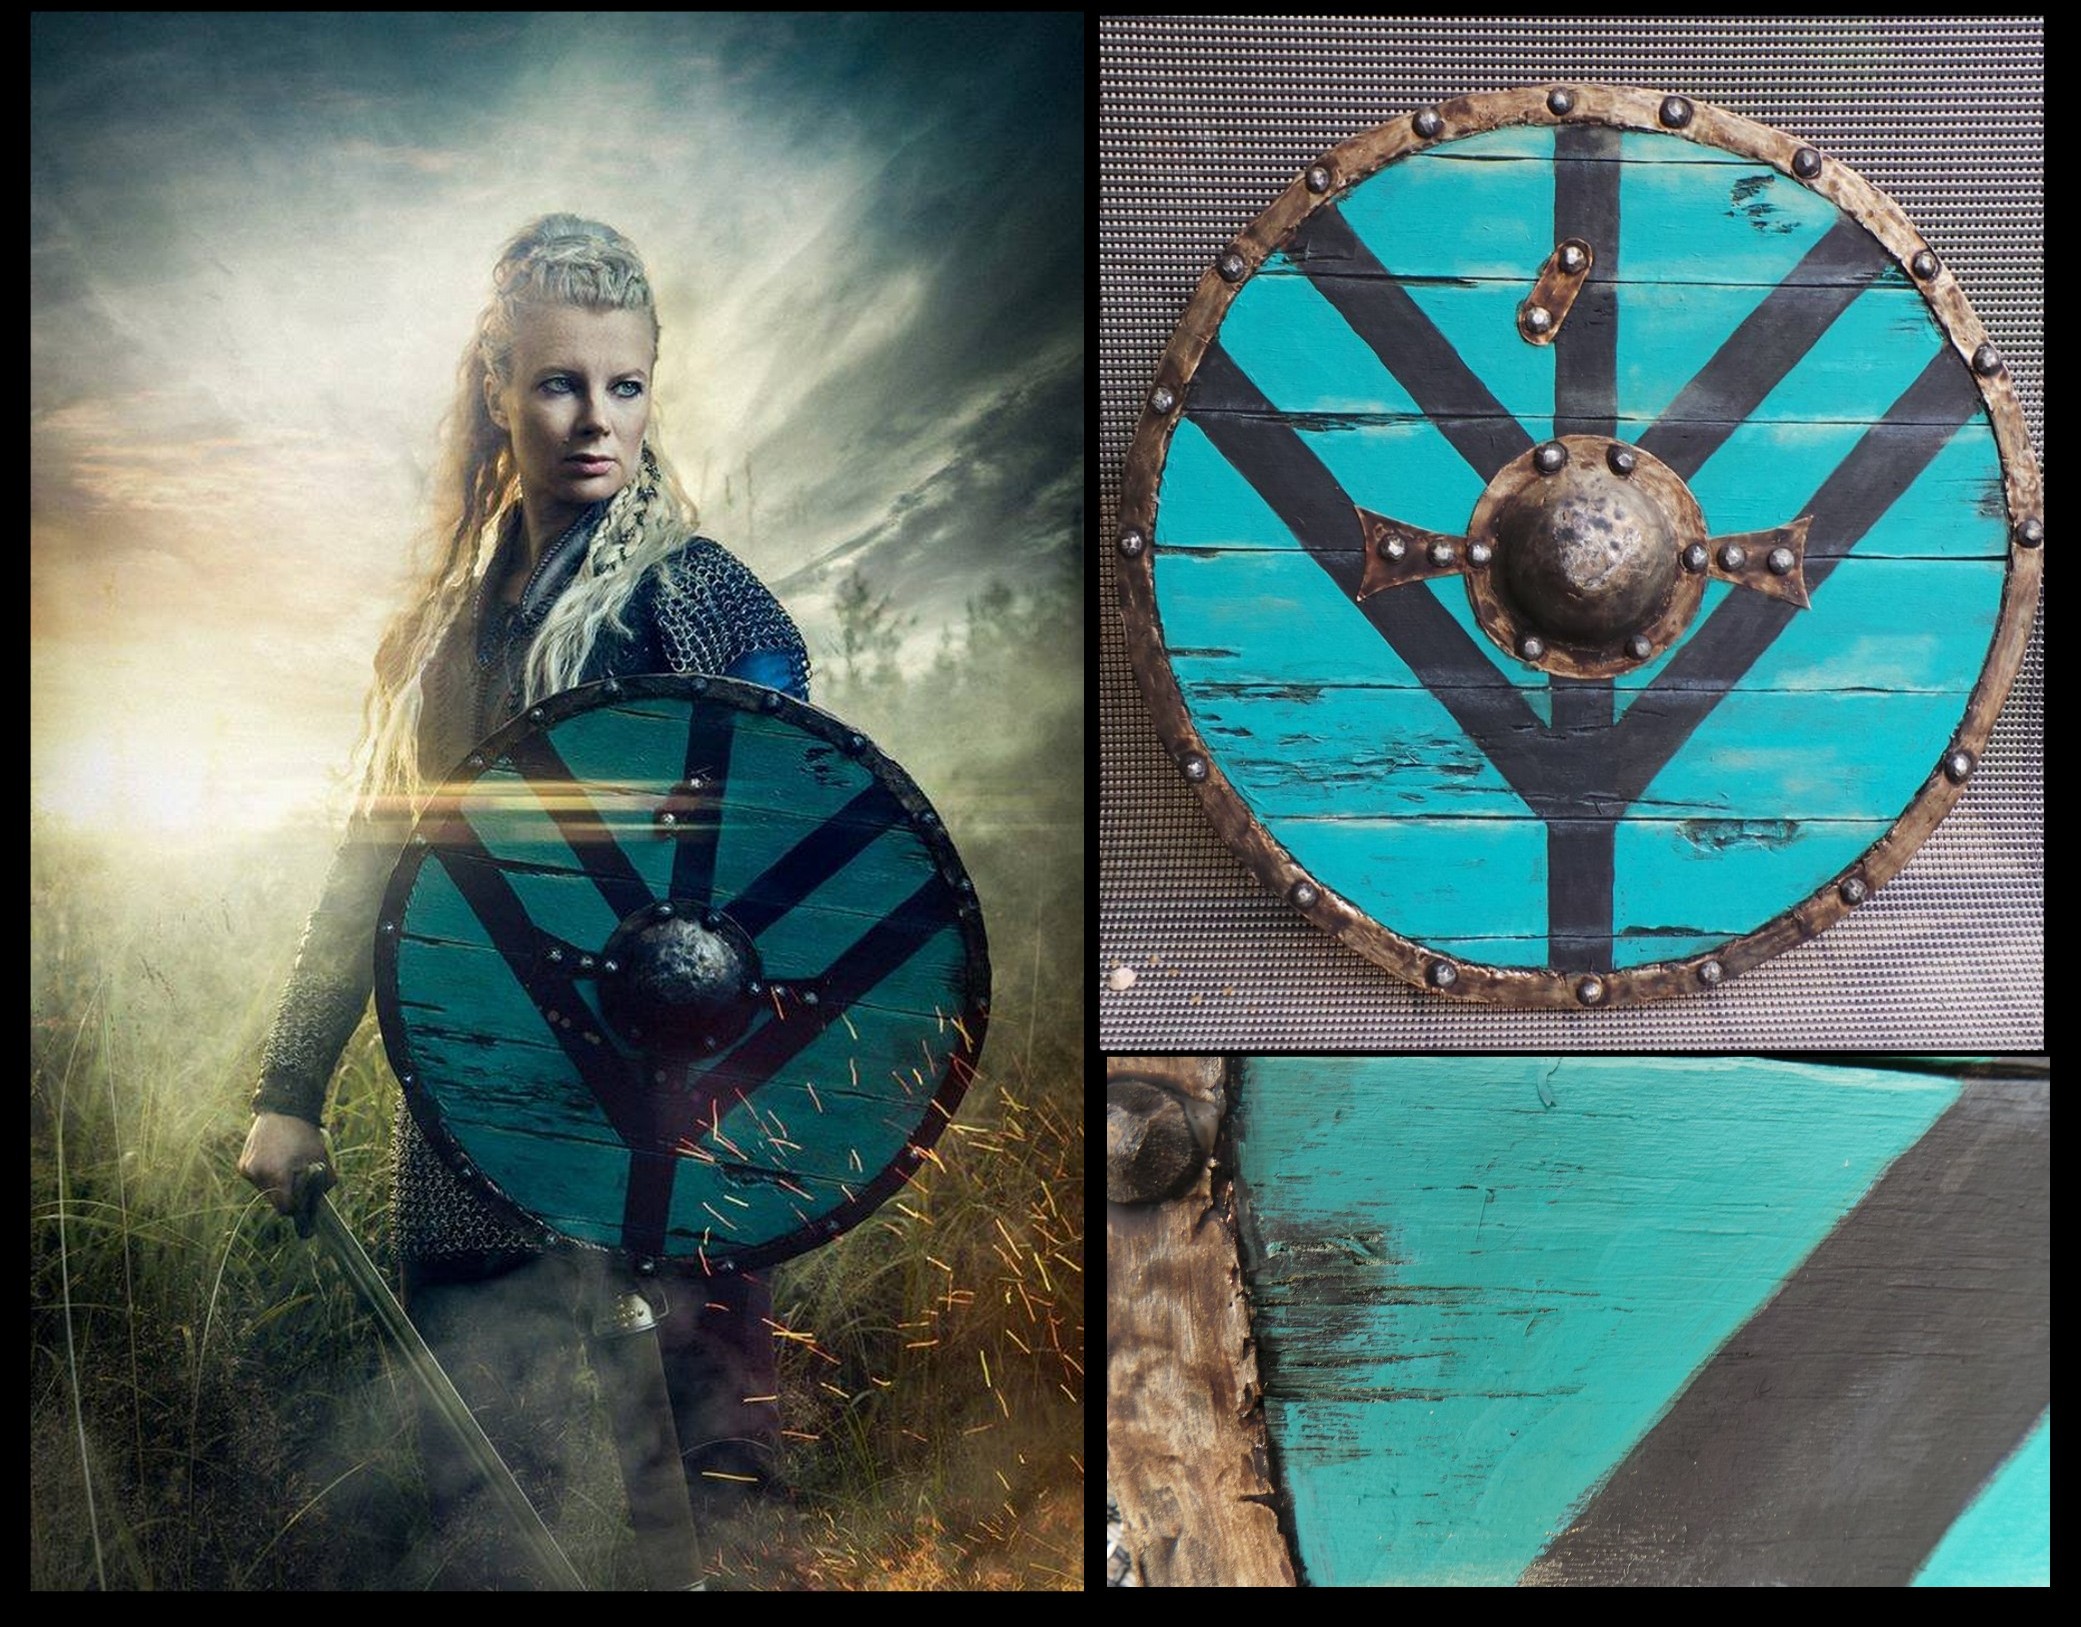 Download The Shieldmaiden Lagertha, Ready for Battle